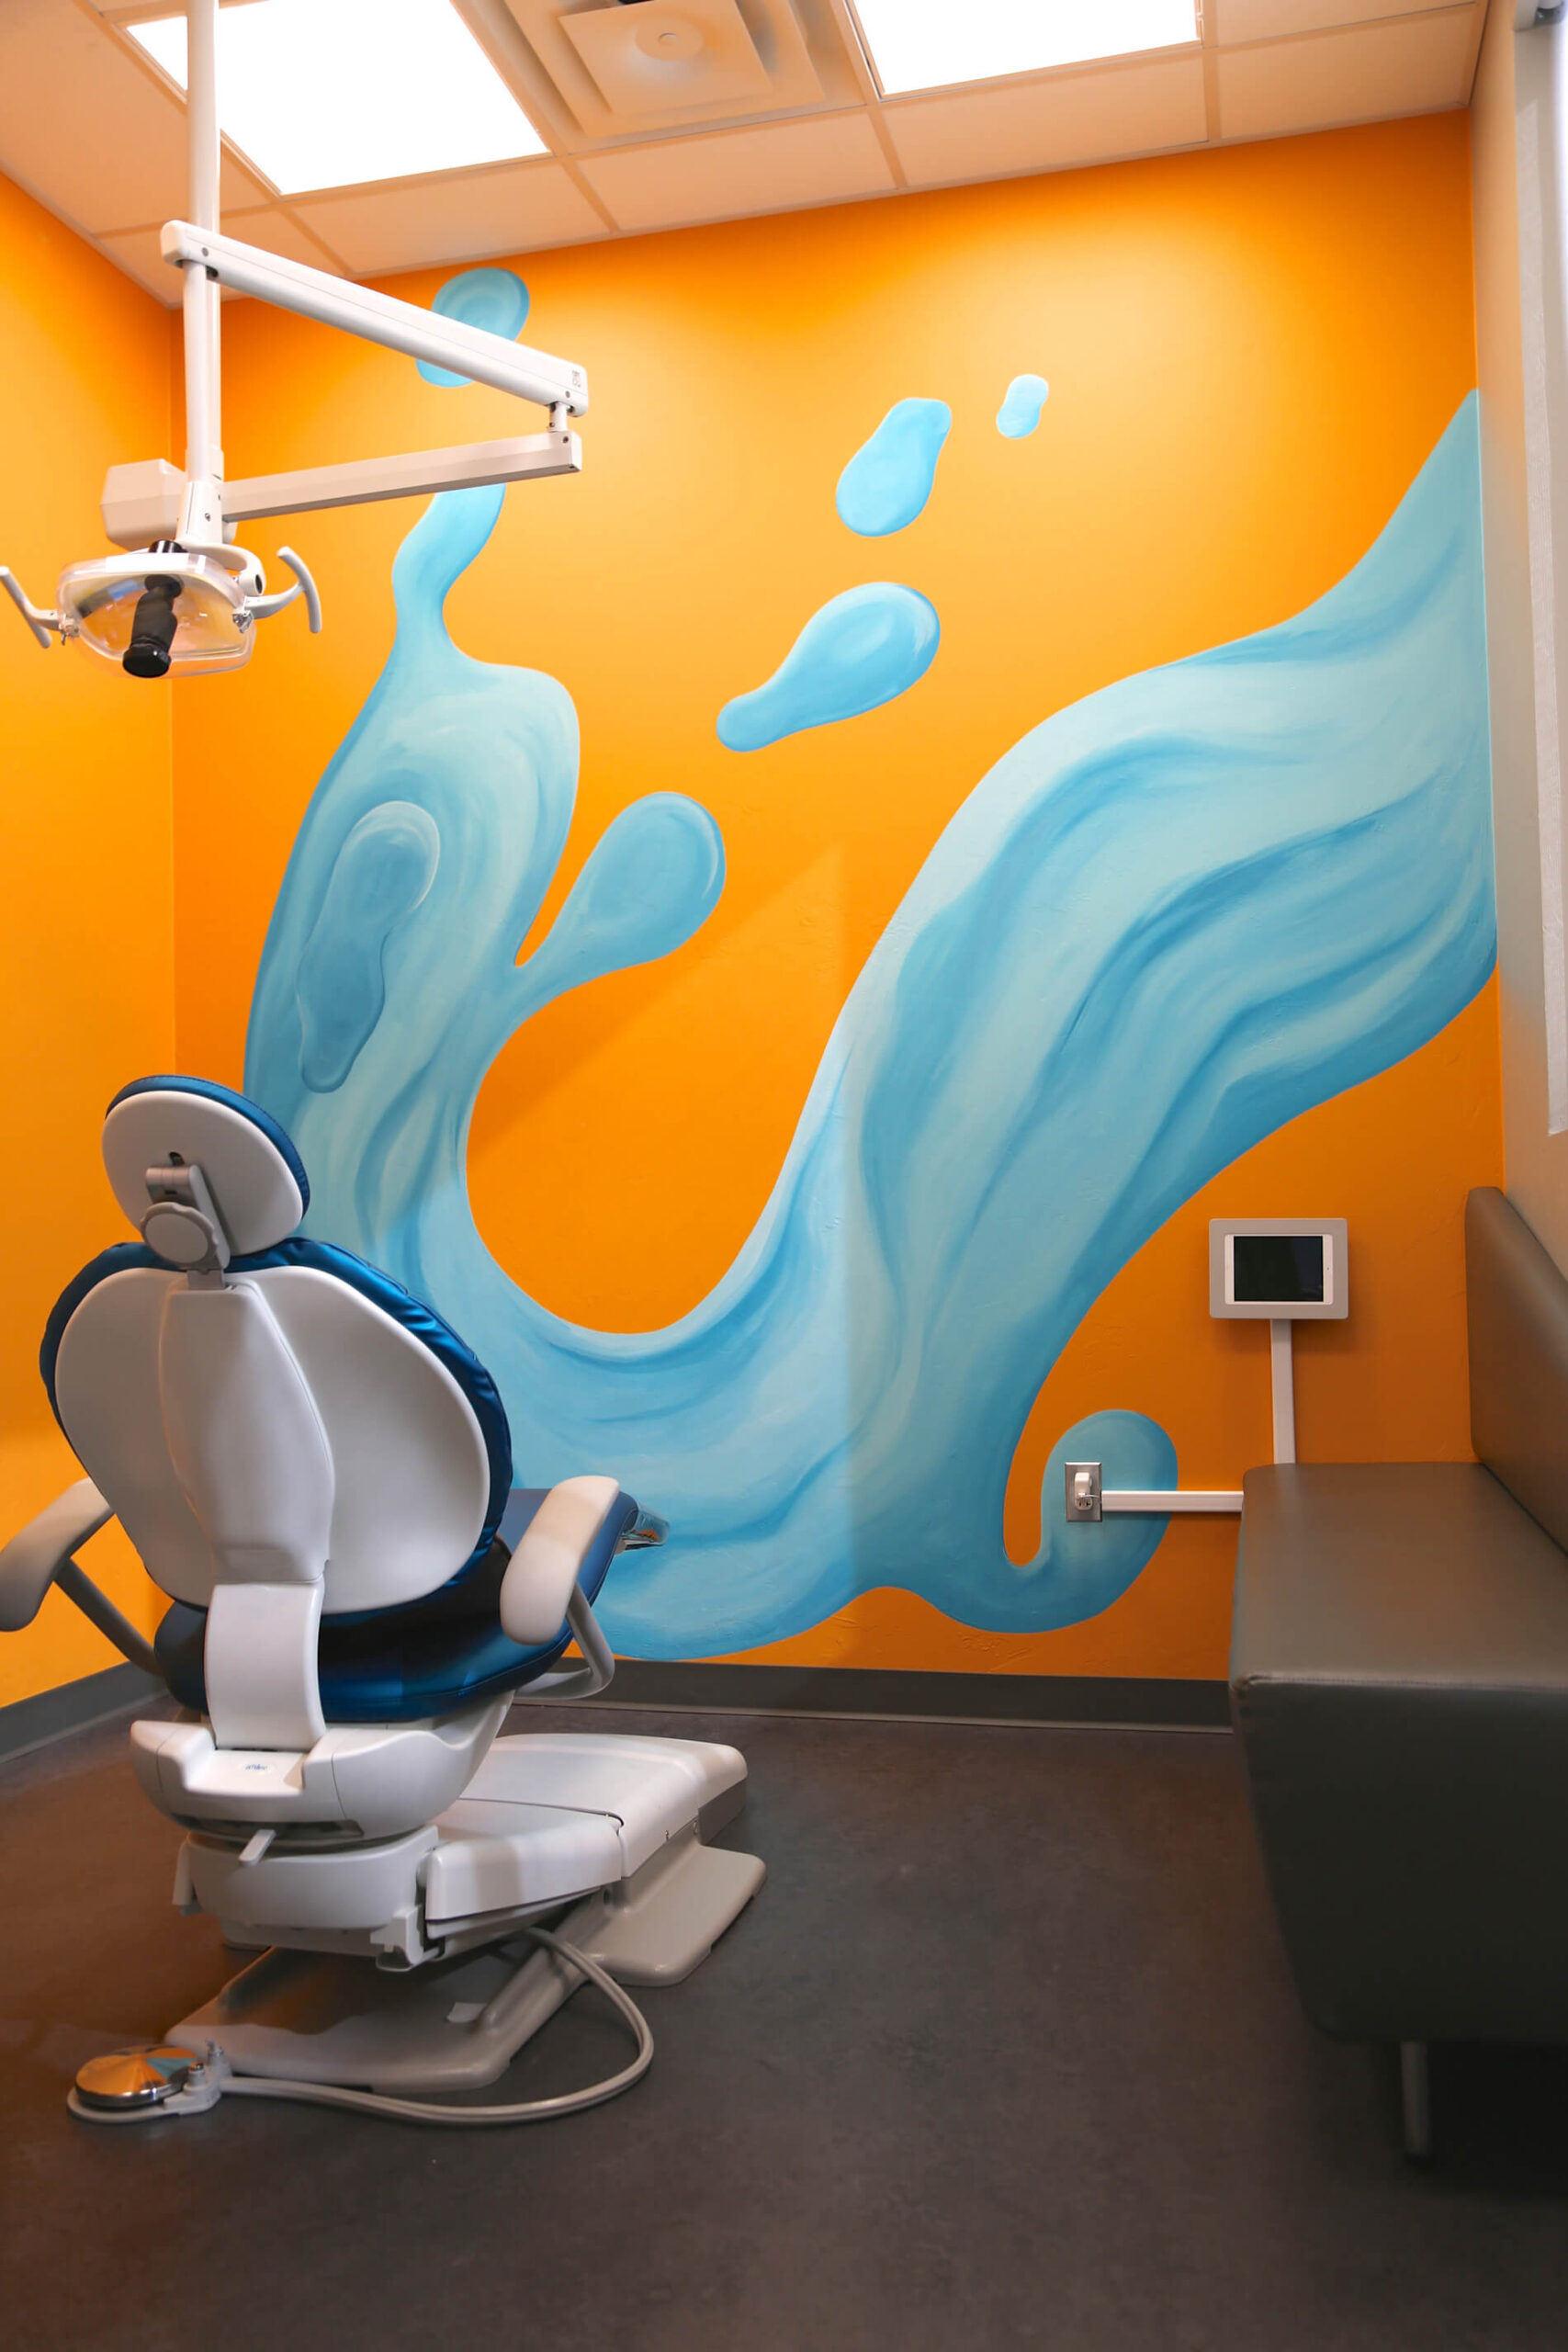 Private exam rooms for pediatric dentistry patients